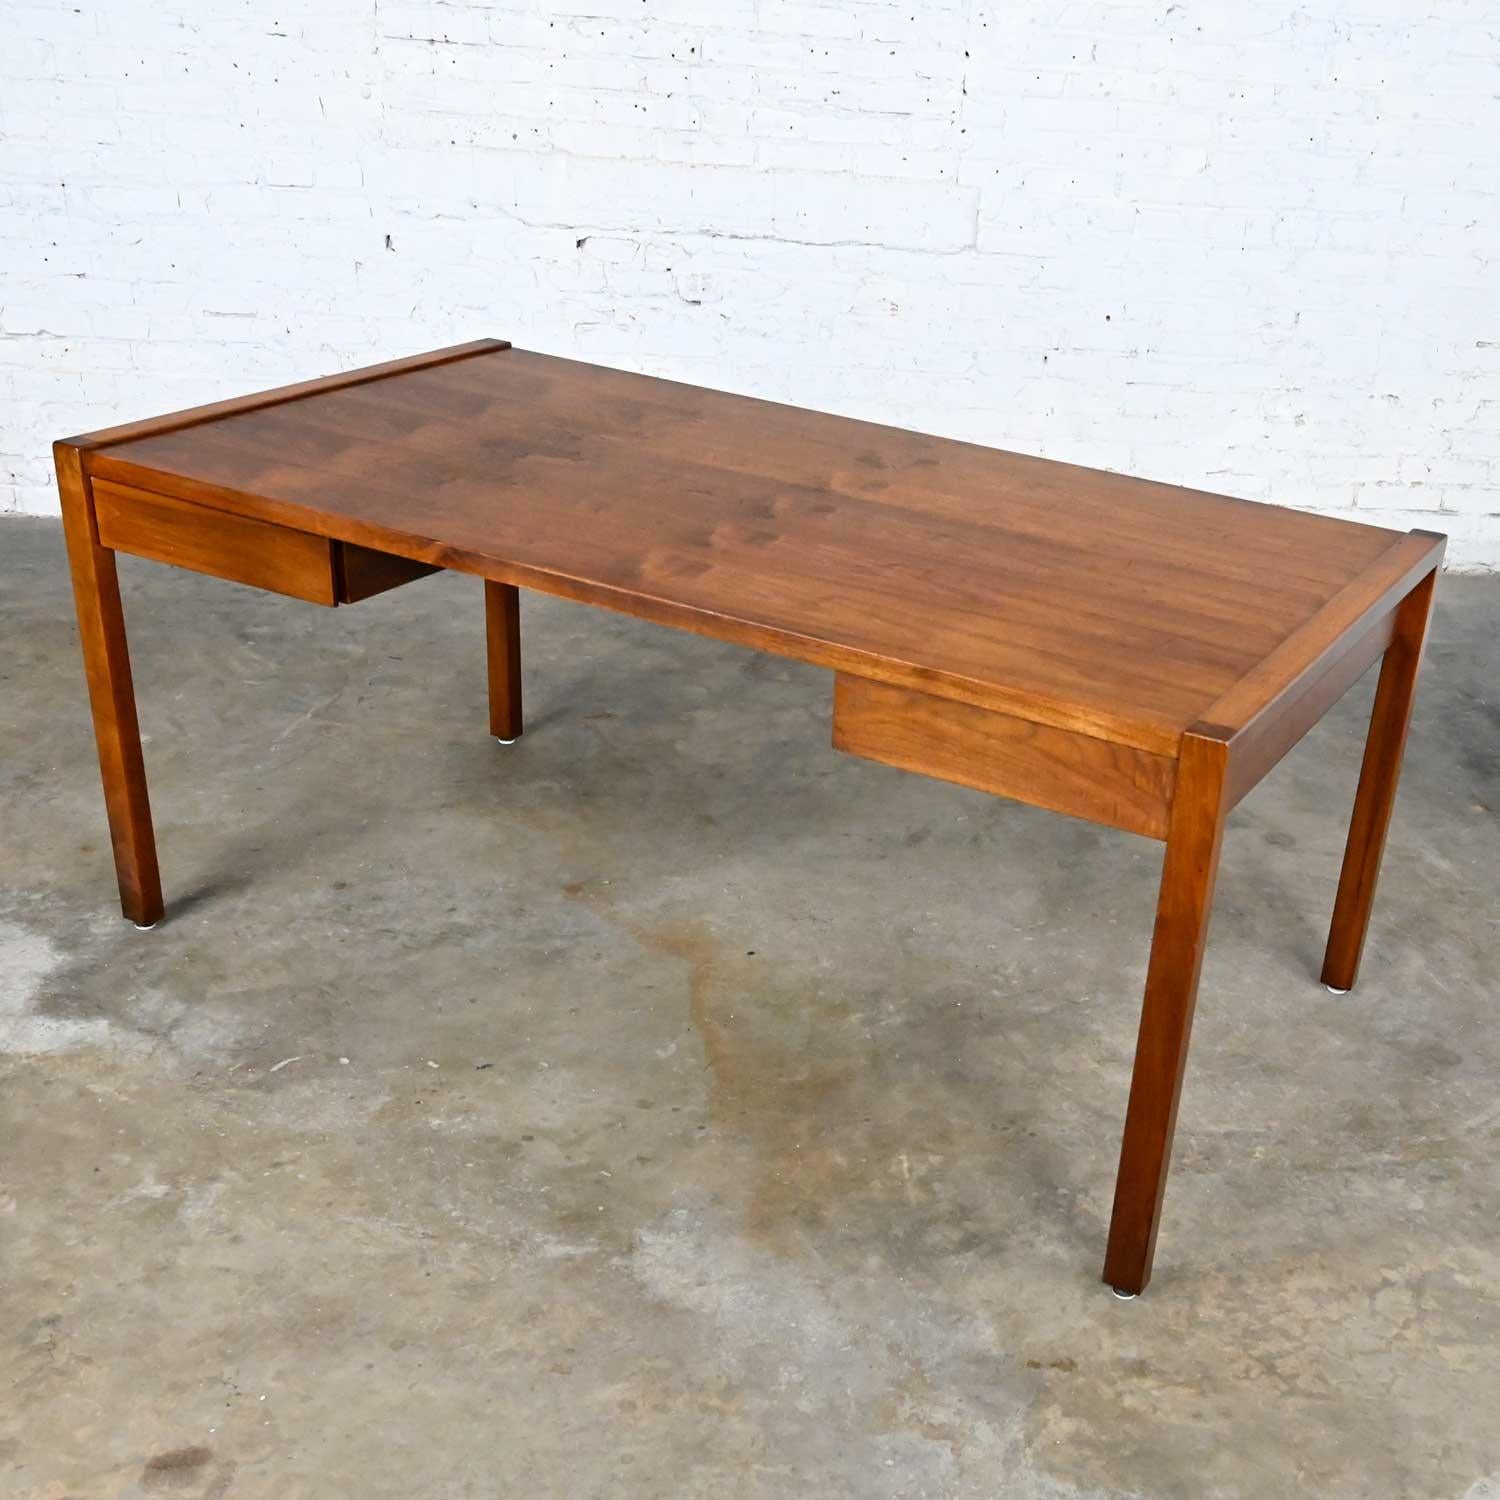 Gorgeous Mid-Century Modern Gunlocke executive walnut desk with a modified Parsons style. Beautiful condition, keeping in mind that this is vintage and not new so will have signs of use and wear. The front left leg has had a missing piece filled and